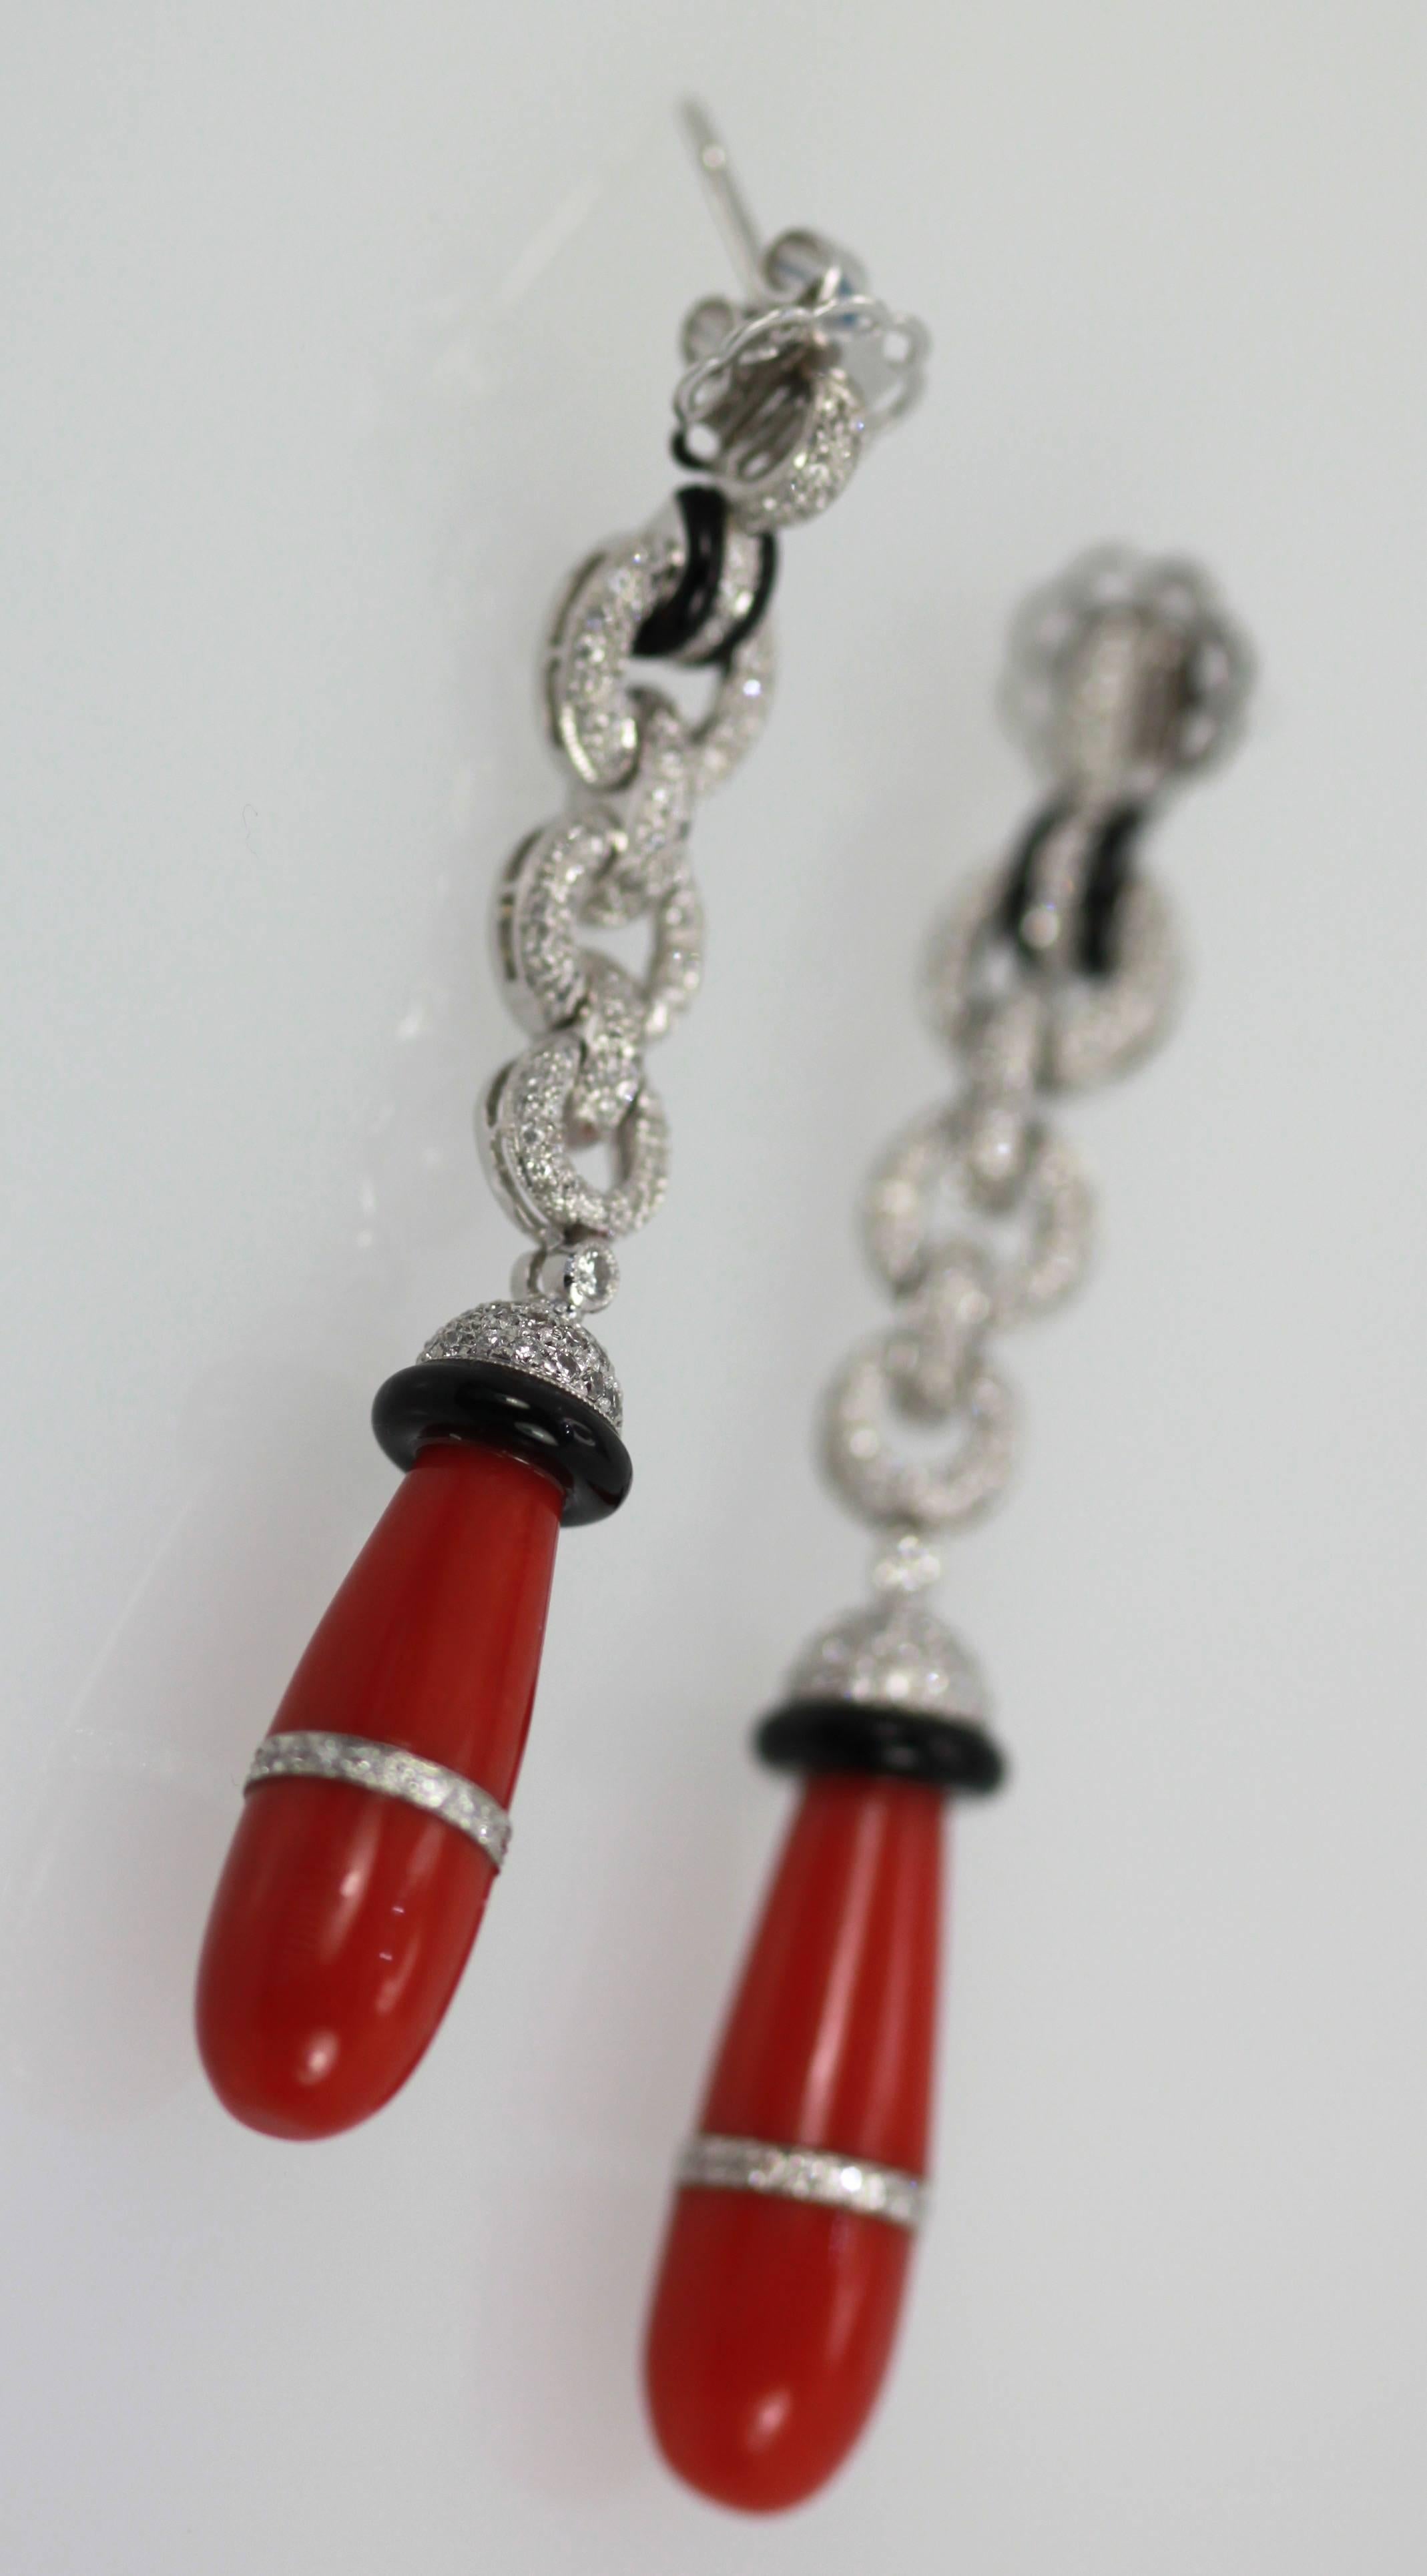 Drop Dead gorgeous Eli Frei Coral Earrings are amazing.  Each Earring features a butterfly post with Pave Diamonds thoughout, gorgeous natural Coral teardrops with a band of Diamonds aroud each Coral stone.  Onyx circle on top of Coral and at top of